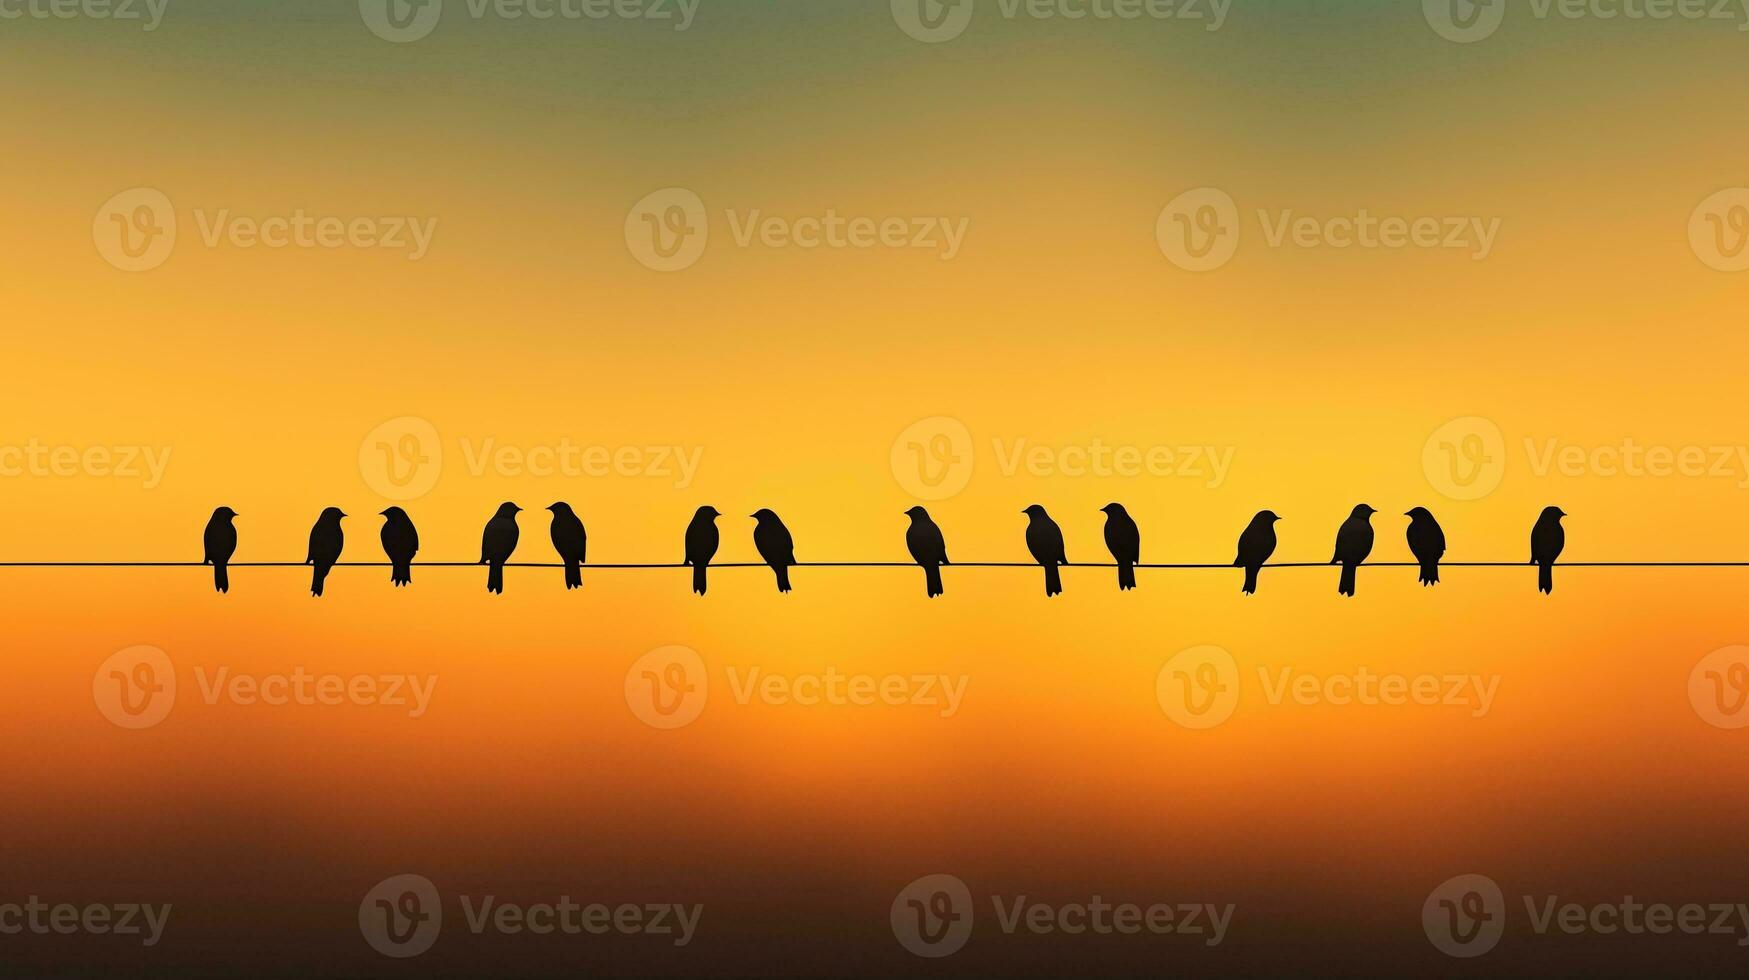 Ideal background for minimalist bird silhouette photography photo